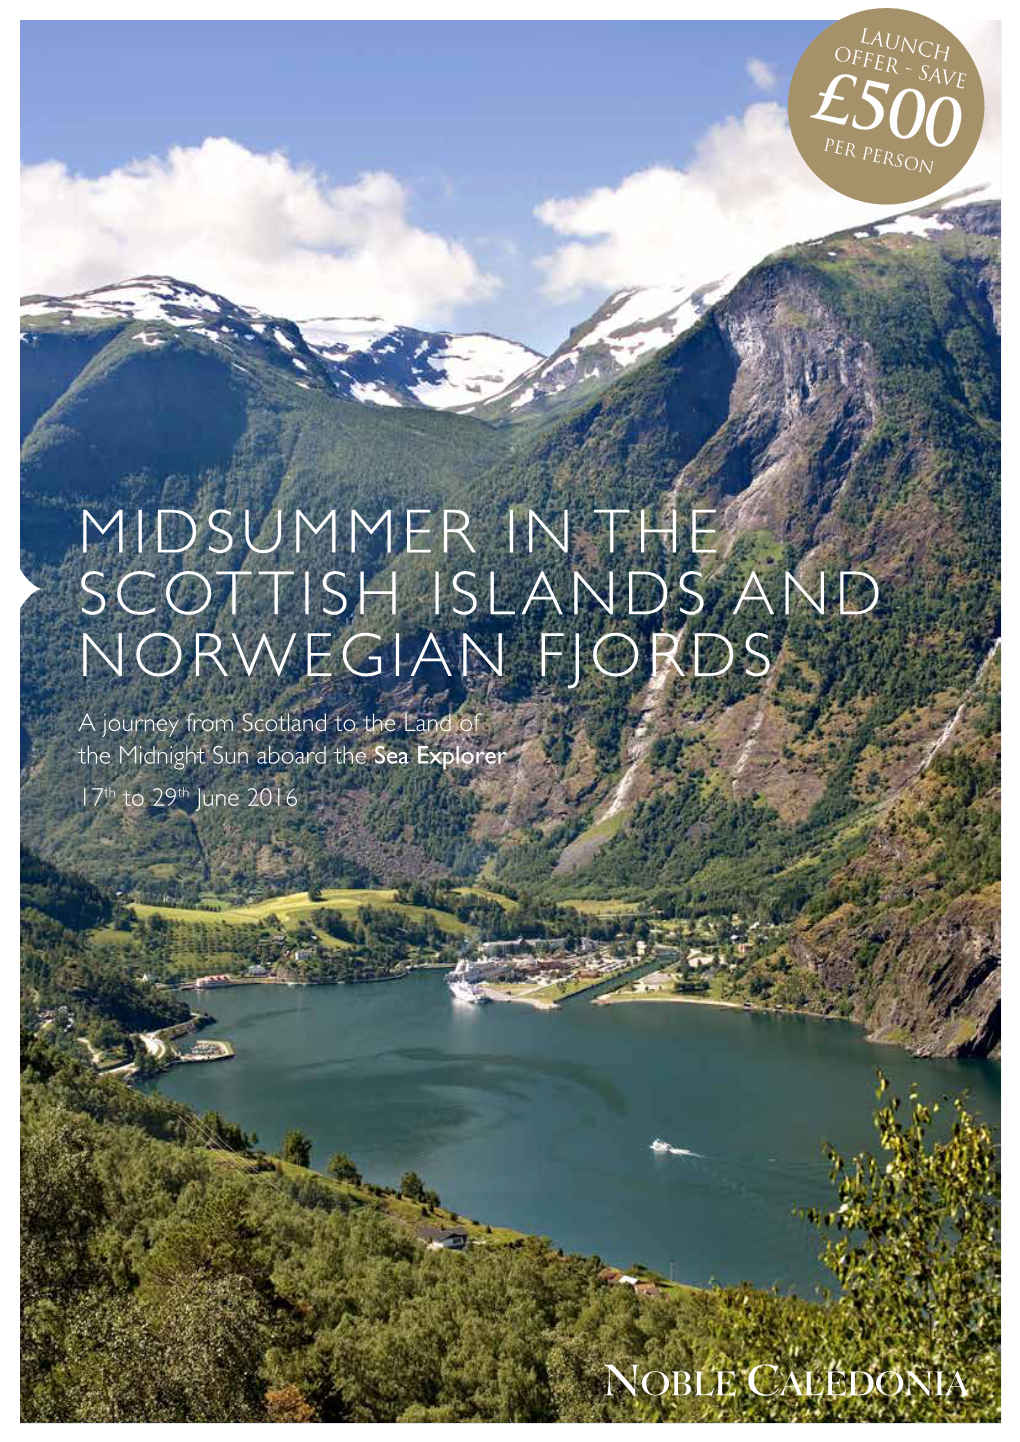 Midsummer in the Scottish Islands and Norwegian Fjords